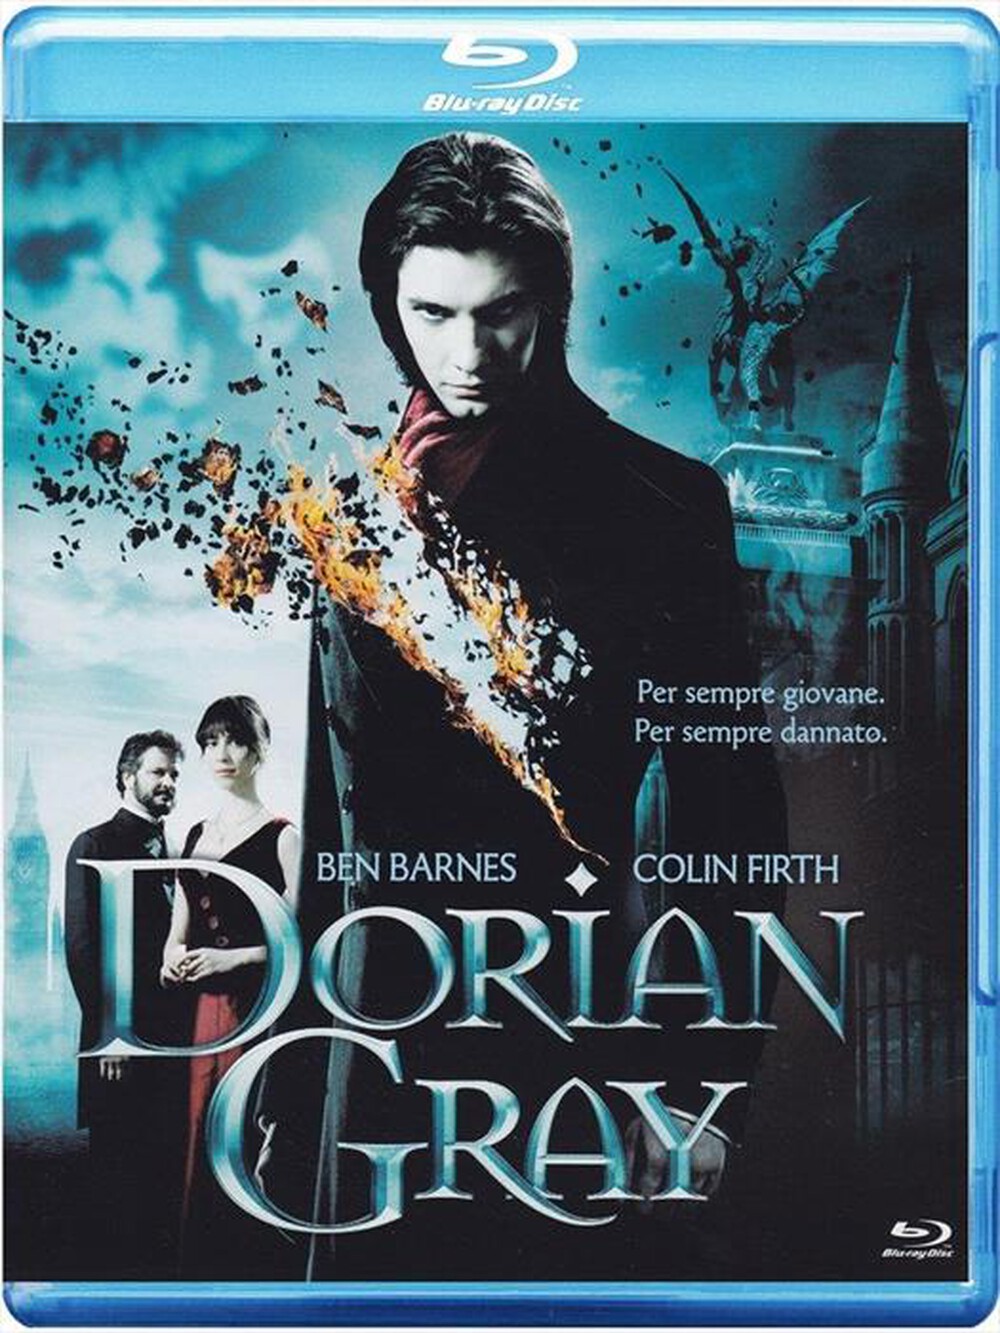 "EAGLE PICTURES - Dorian Gray (2009) - "